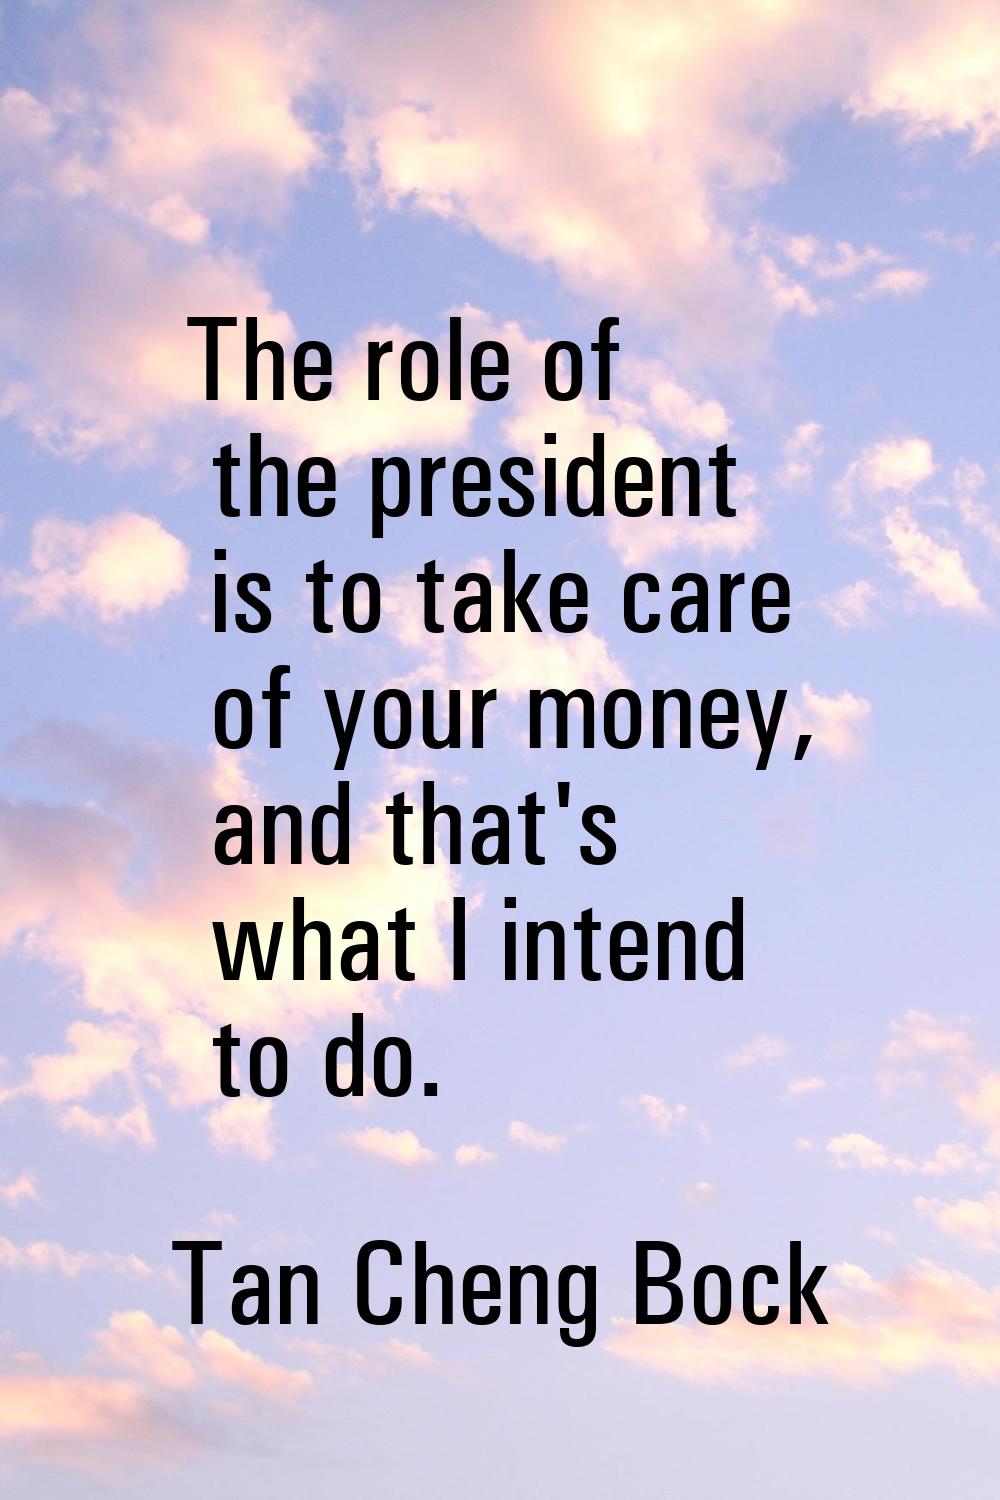 The role of the president is to take care of your money, and that's what I intend to do.